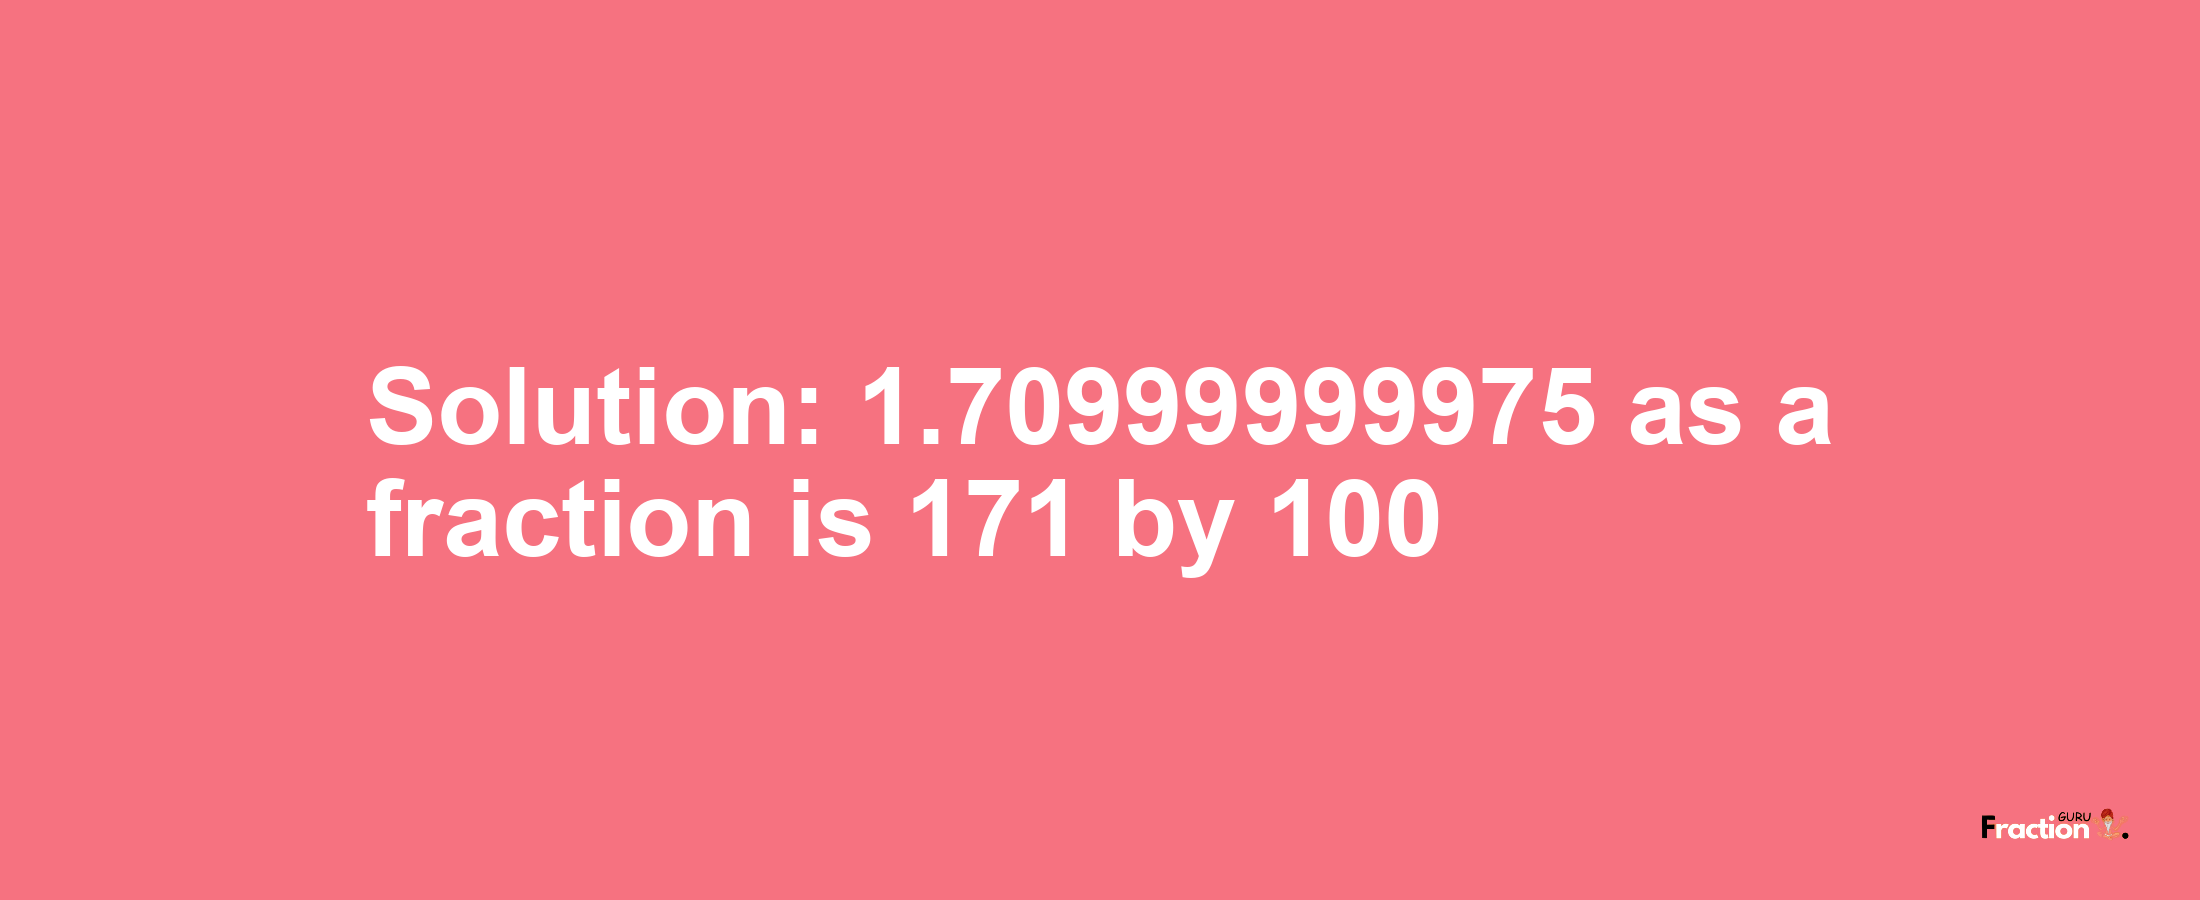 Solution:1.70999999975 as a fraction is 171/100